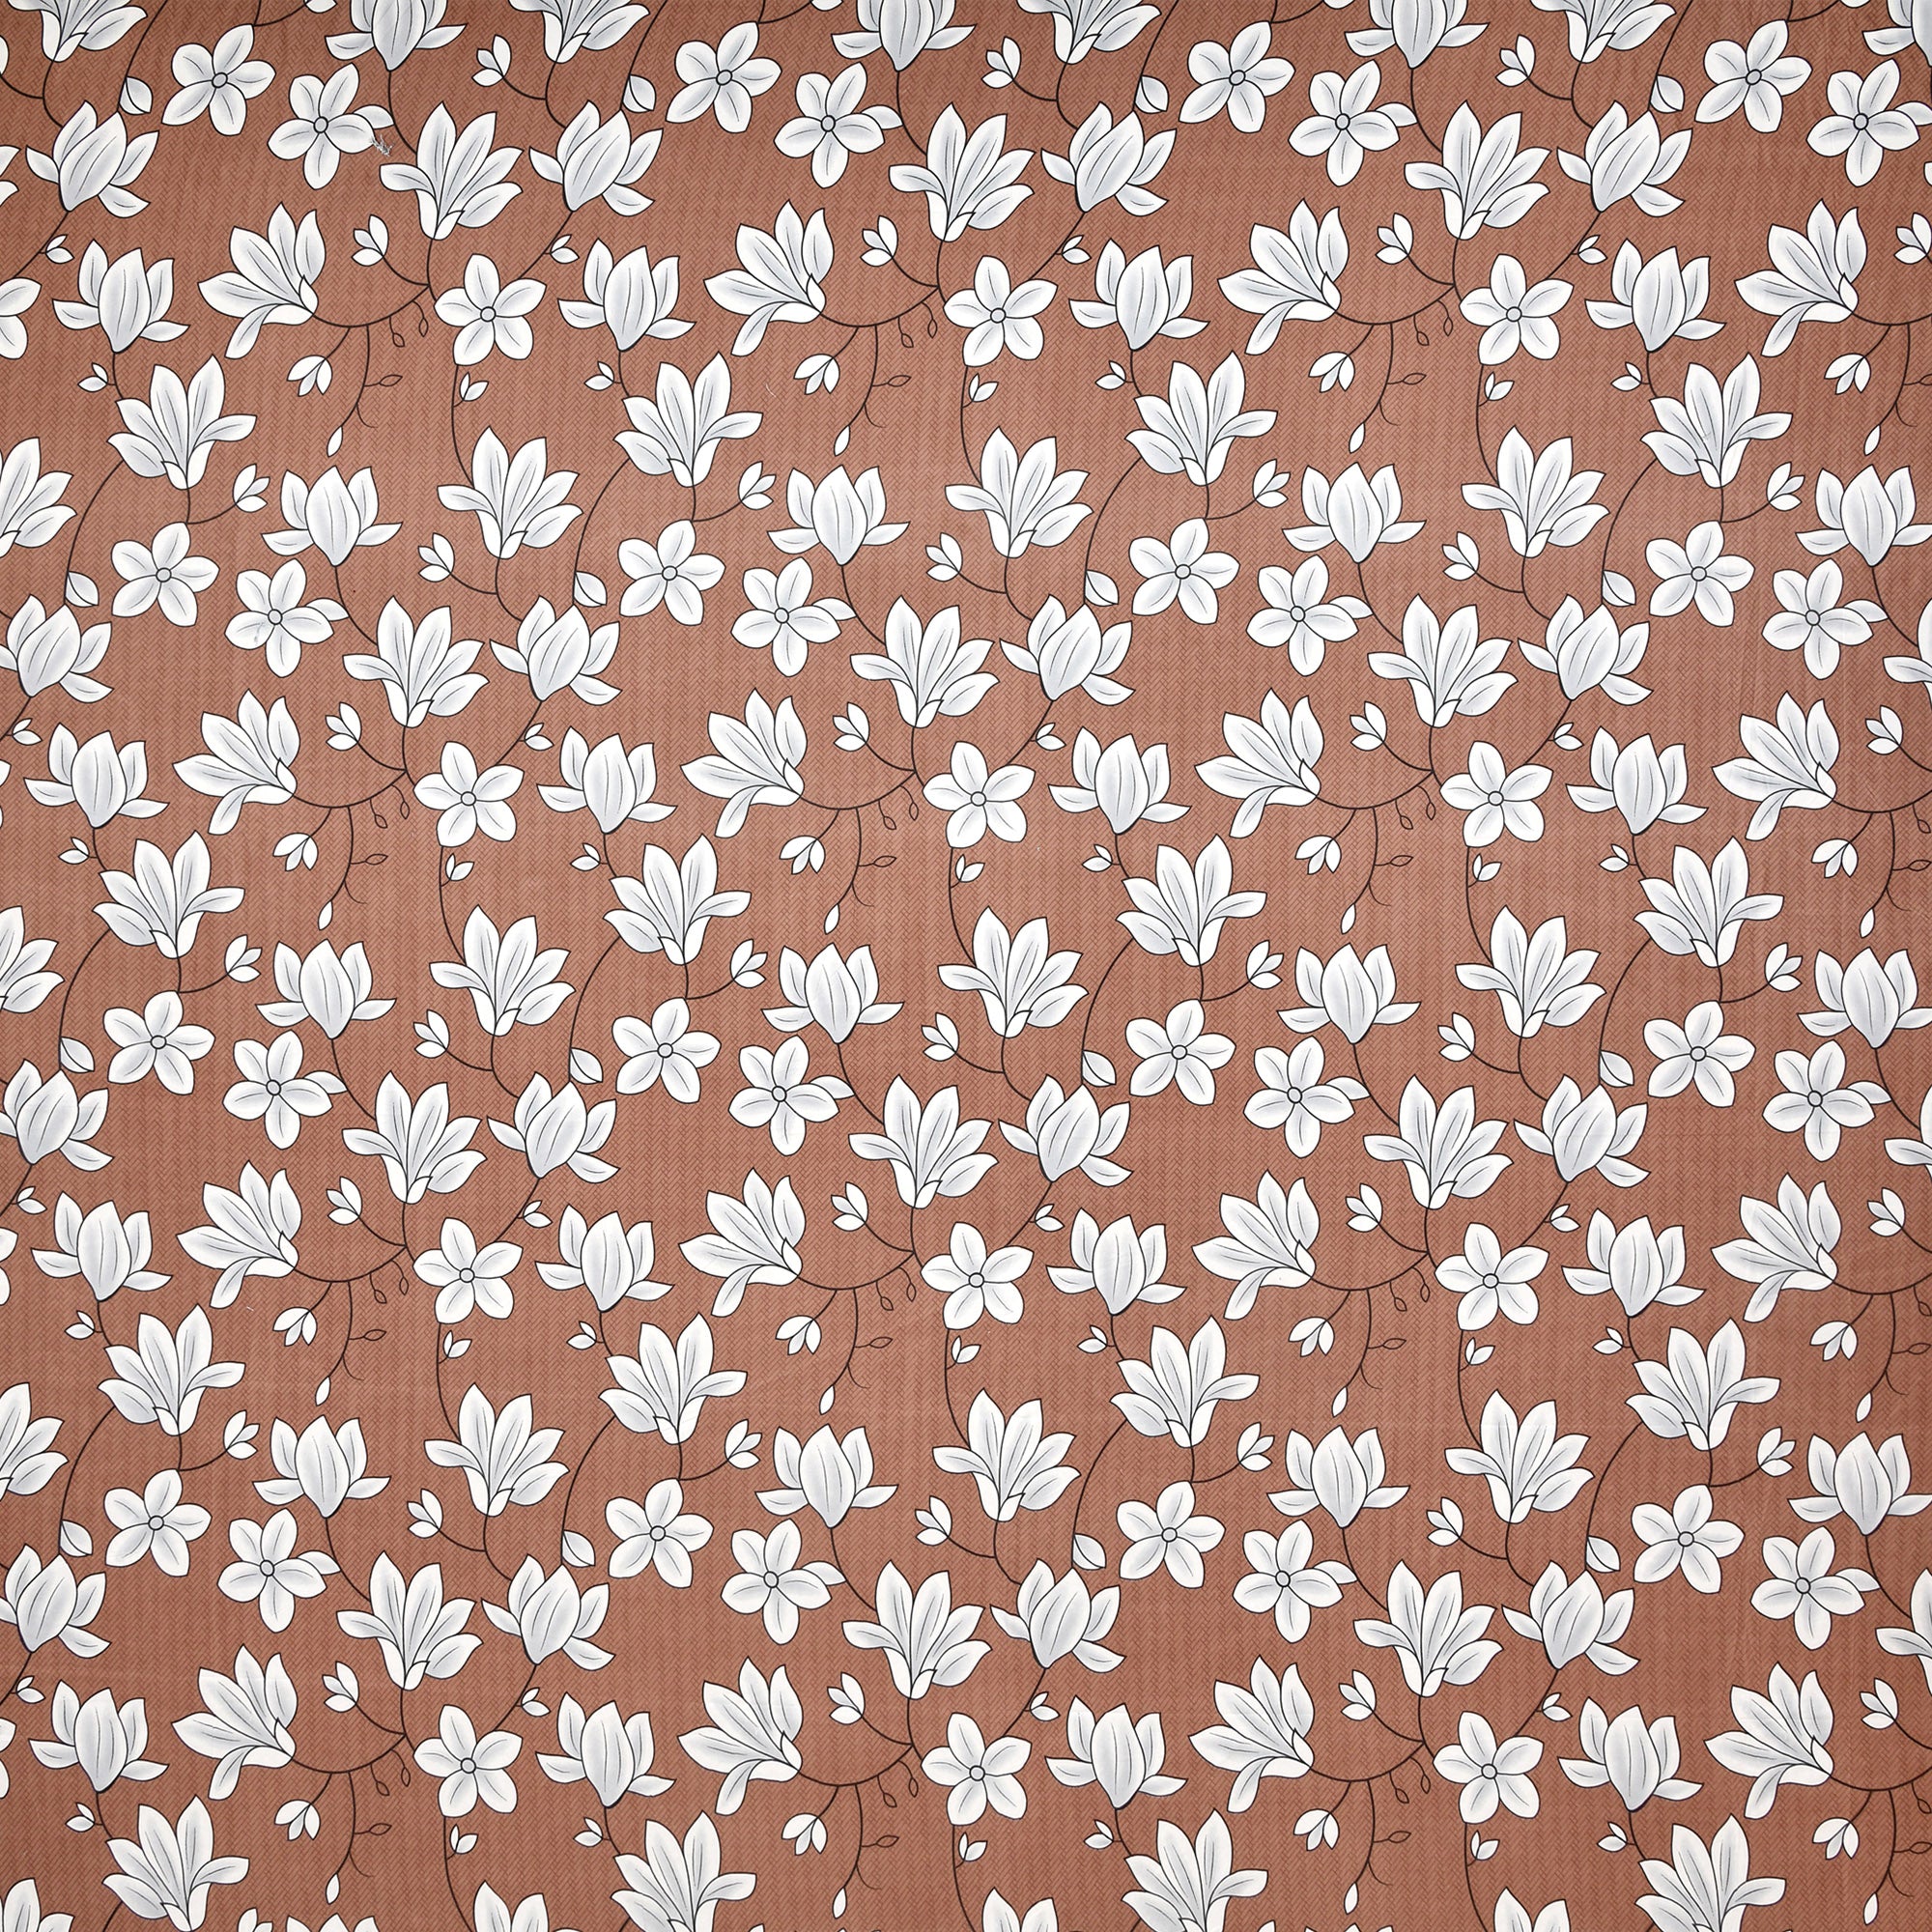 eCraftIndia 250 TC Brown & White Flowers Printed Cotton Double Bedsheet With 2 Pillow Covers 6